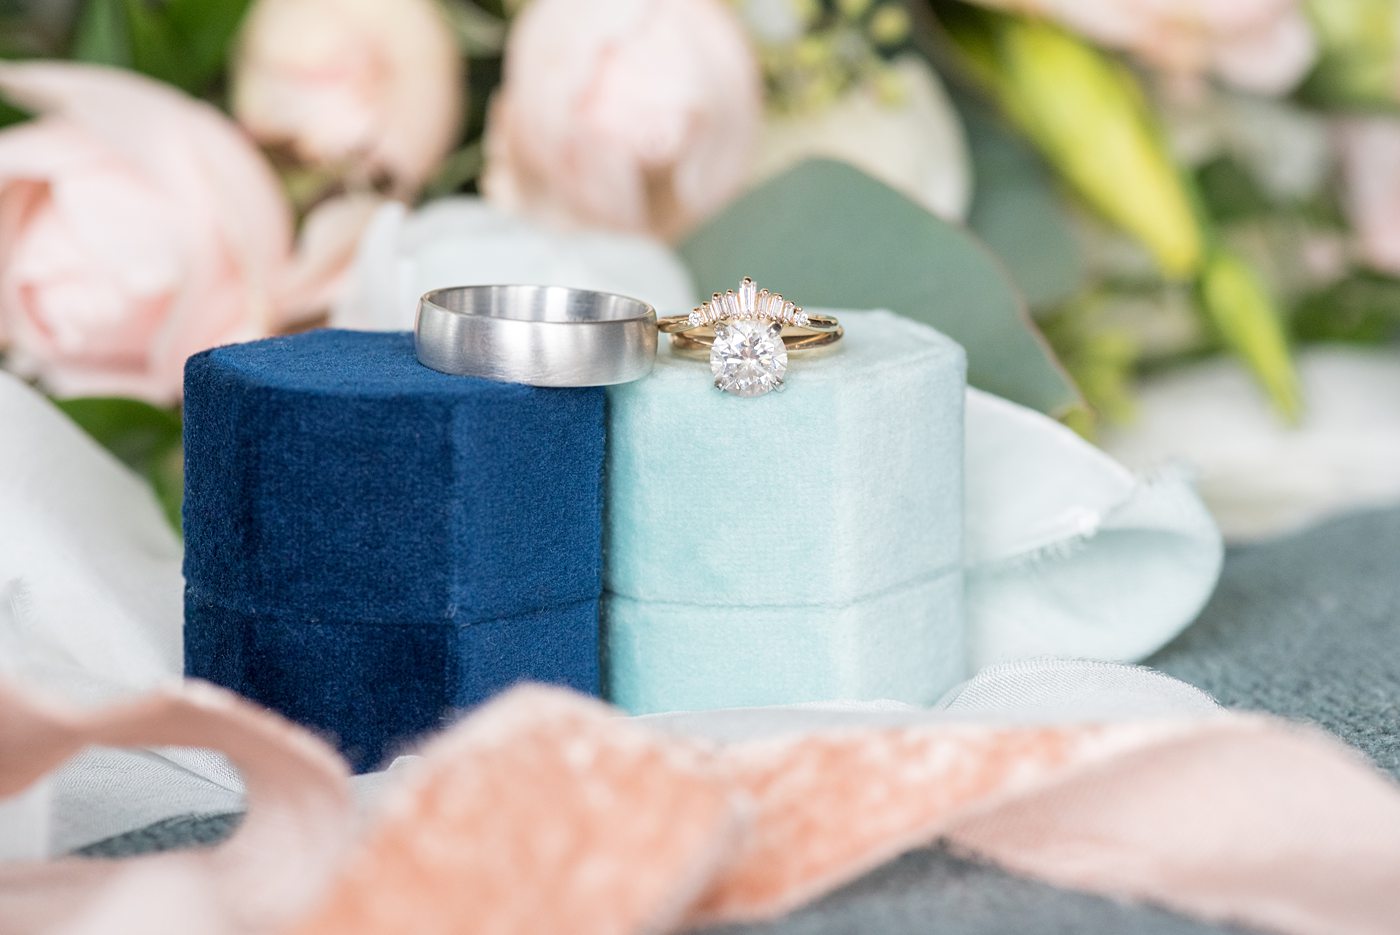 Saratoga Springs destination wedding photos in upstate New York by Mikkel Paige Photography, NY wedding photographer. This picture is of the bride and groom's wedding bands and engagement ring with blue velvet ring boxes. #mikkelpaige #saratogaspringswedding #destinationwedding #velvetringboxes #weddingrings #uniqueweddingrings #uniqueweddingband